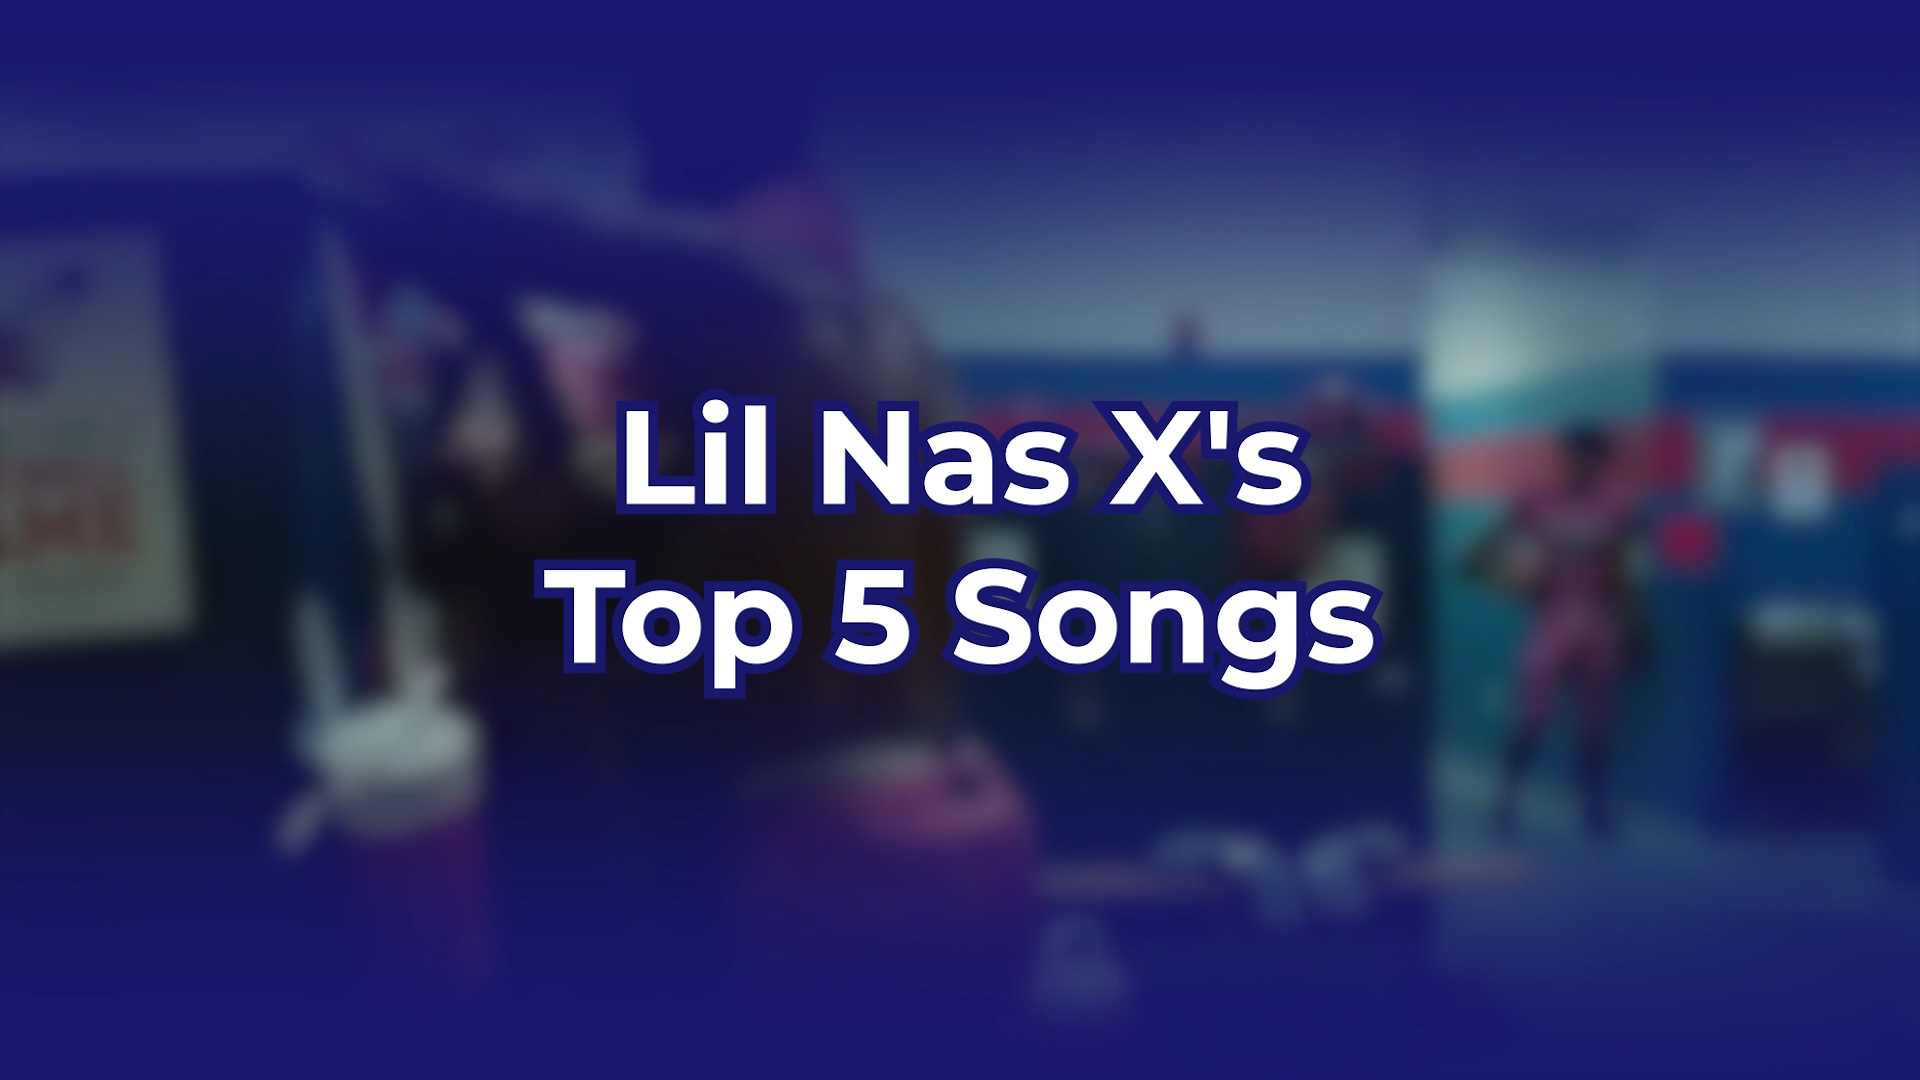 Lil Nas X's Top 5 Songs